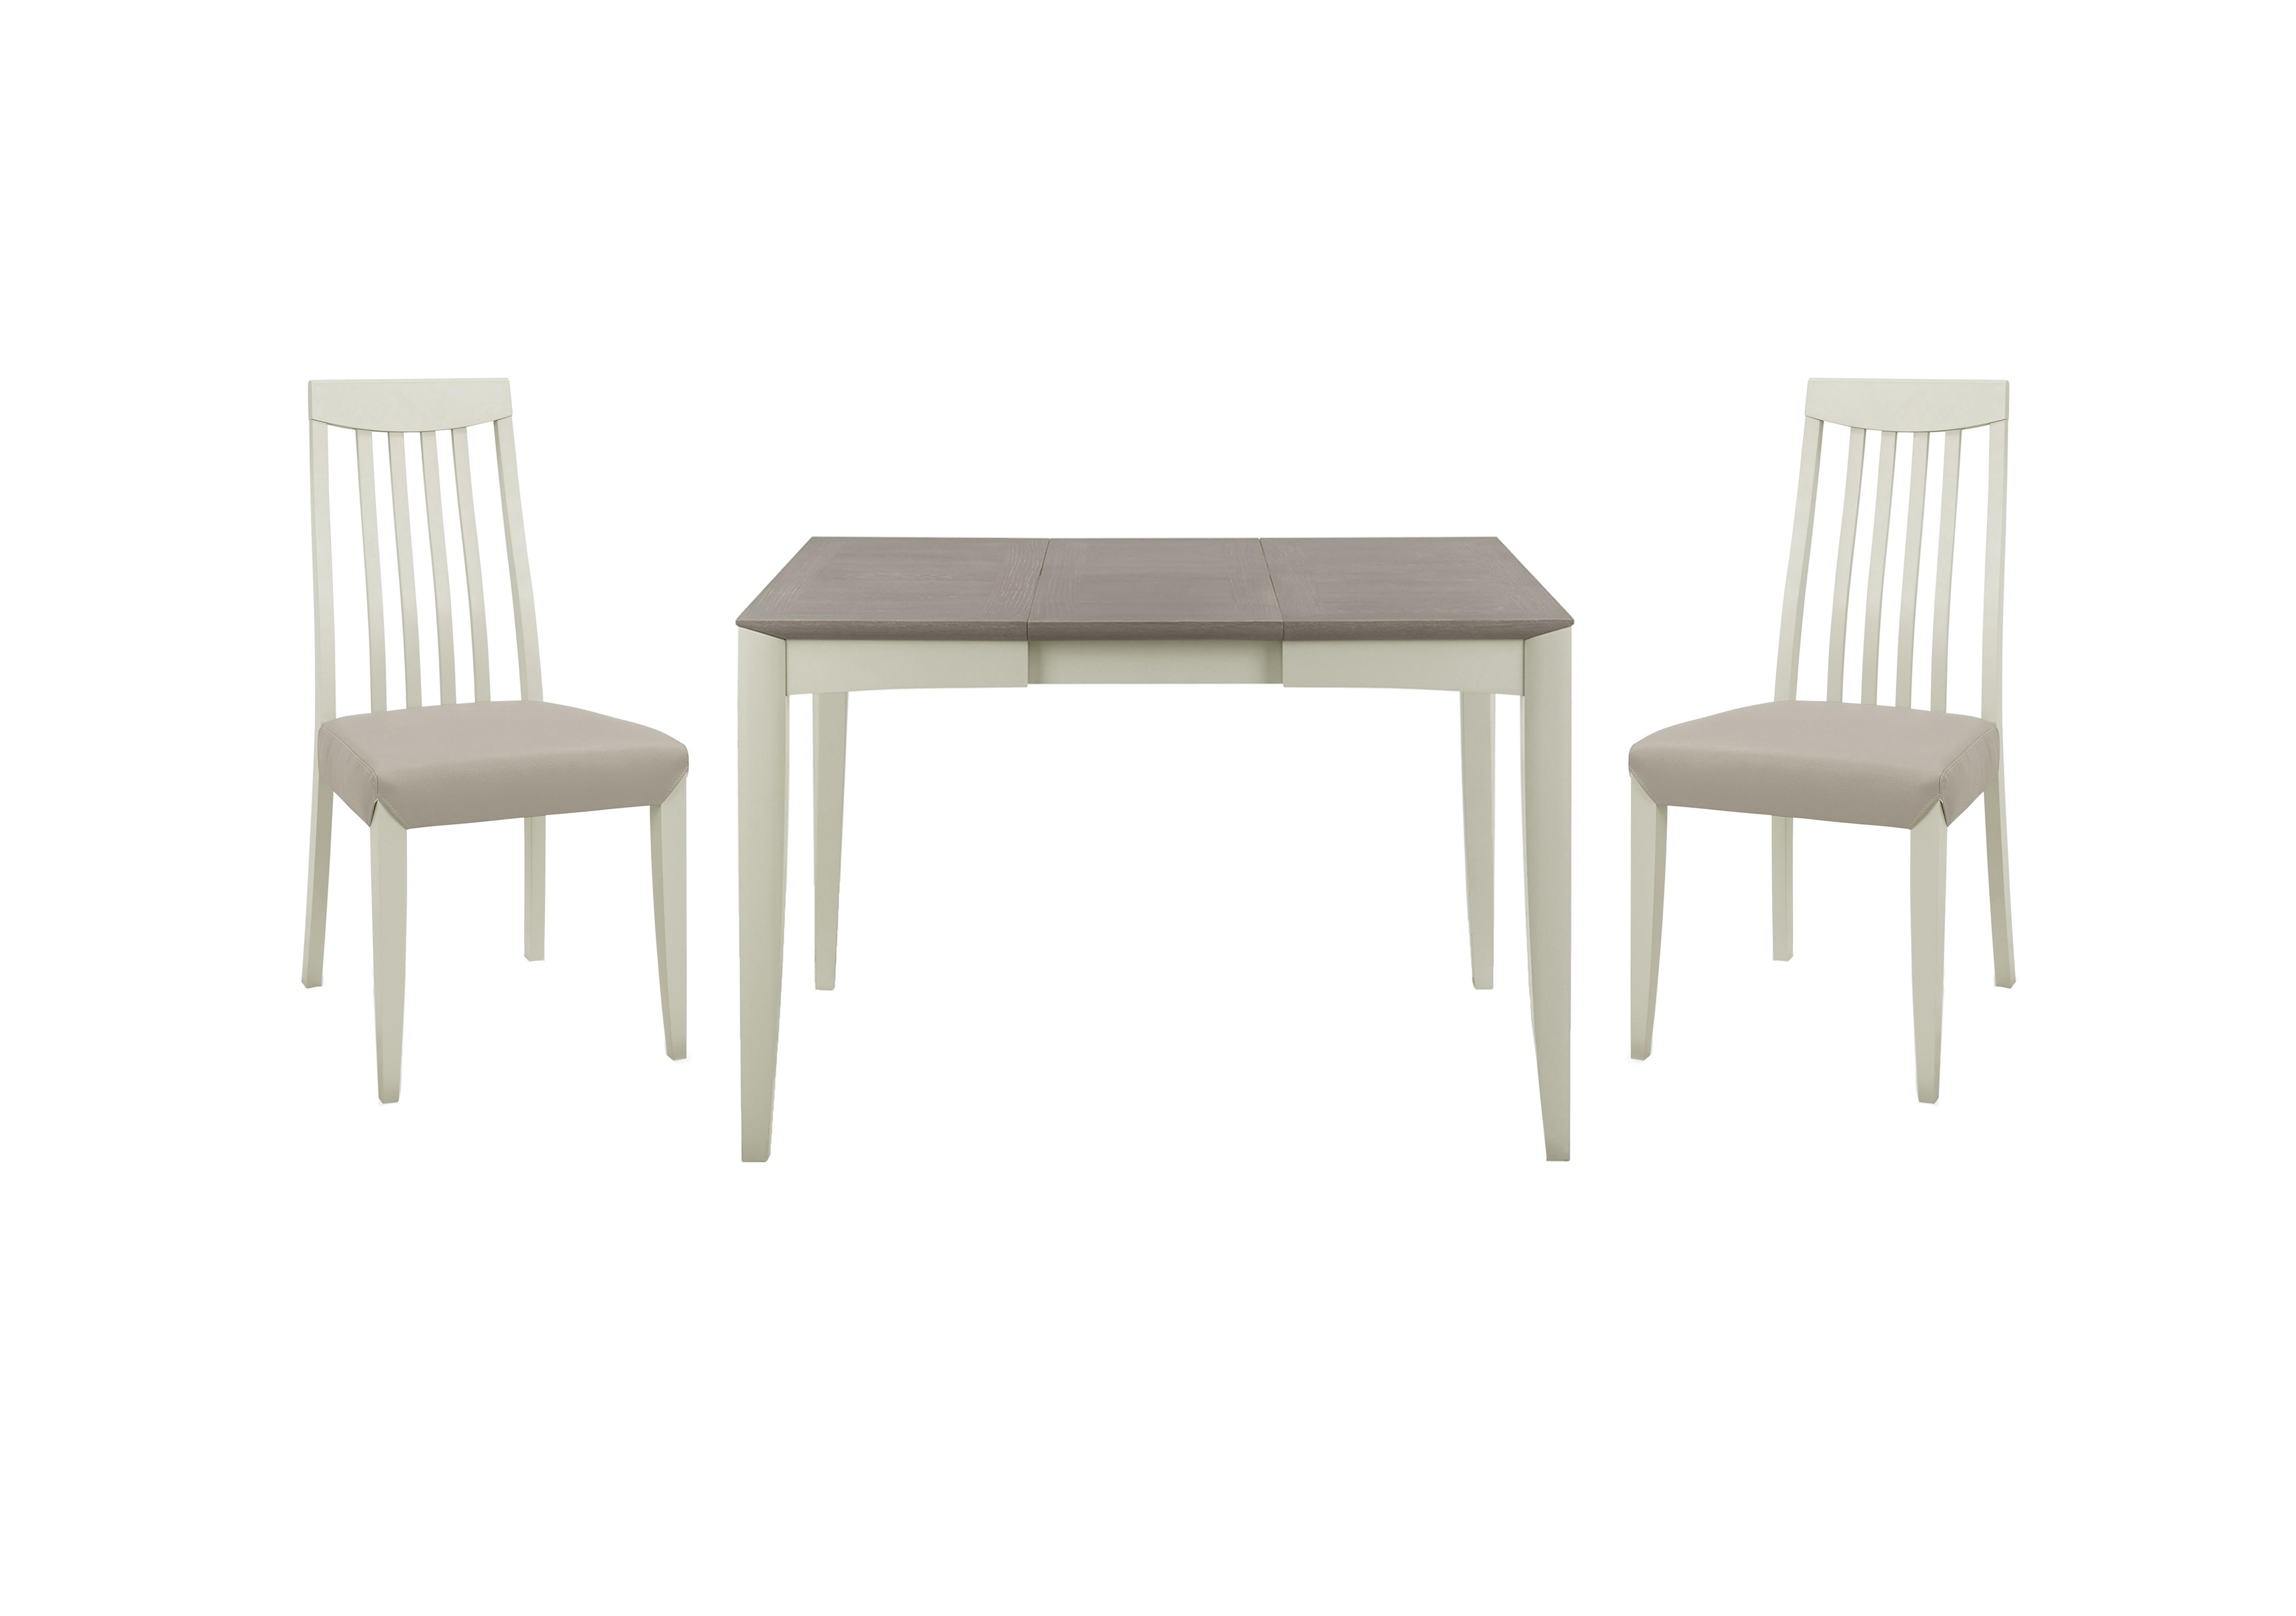 Skye Small Table and 2 Tall Chairs in Two Tone/Grey on Furniture Village